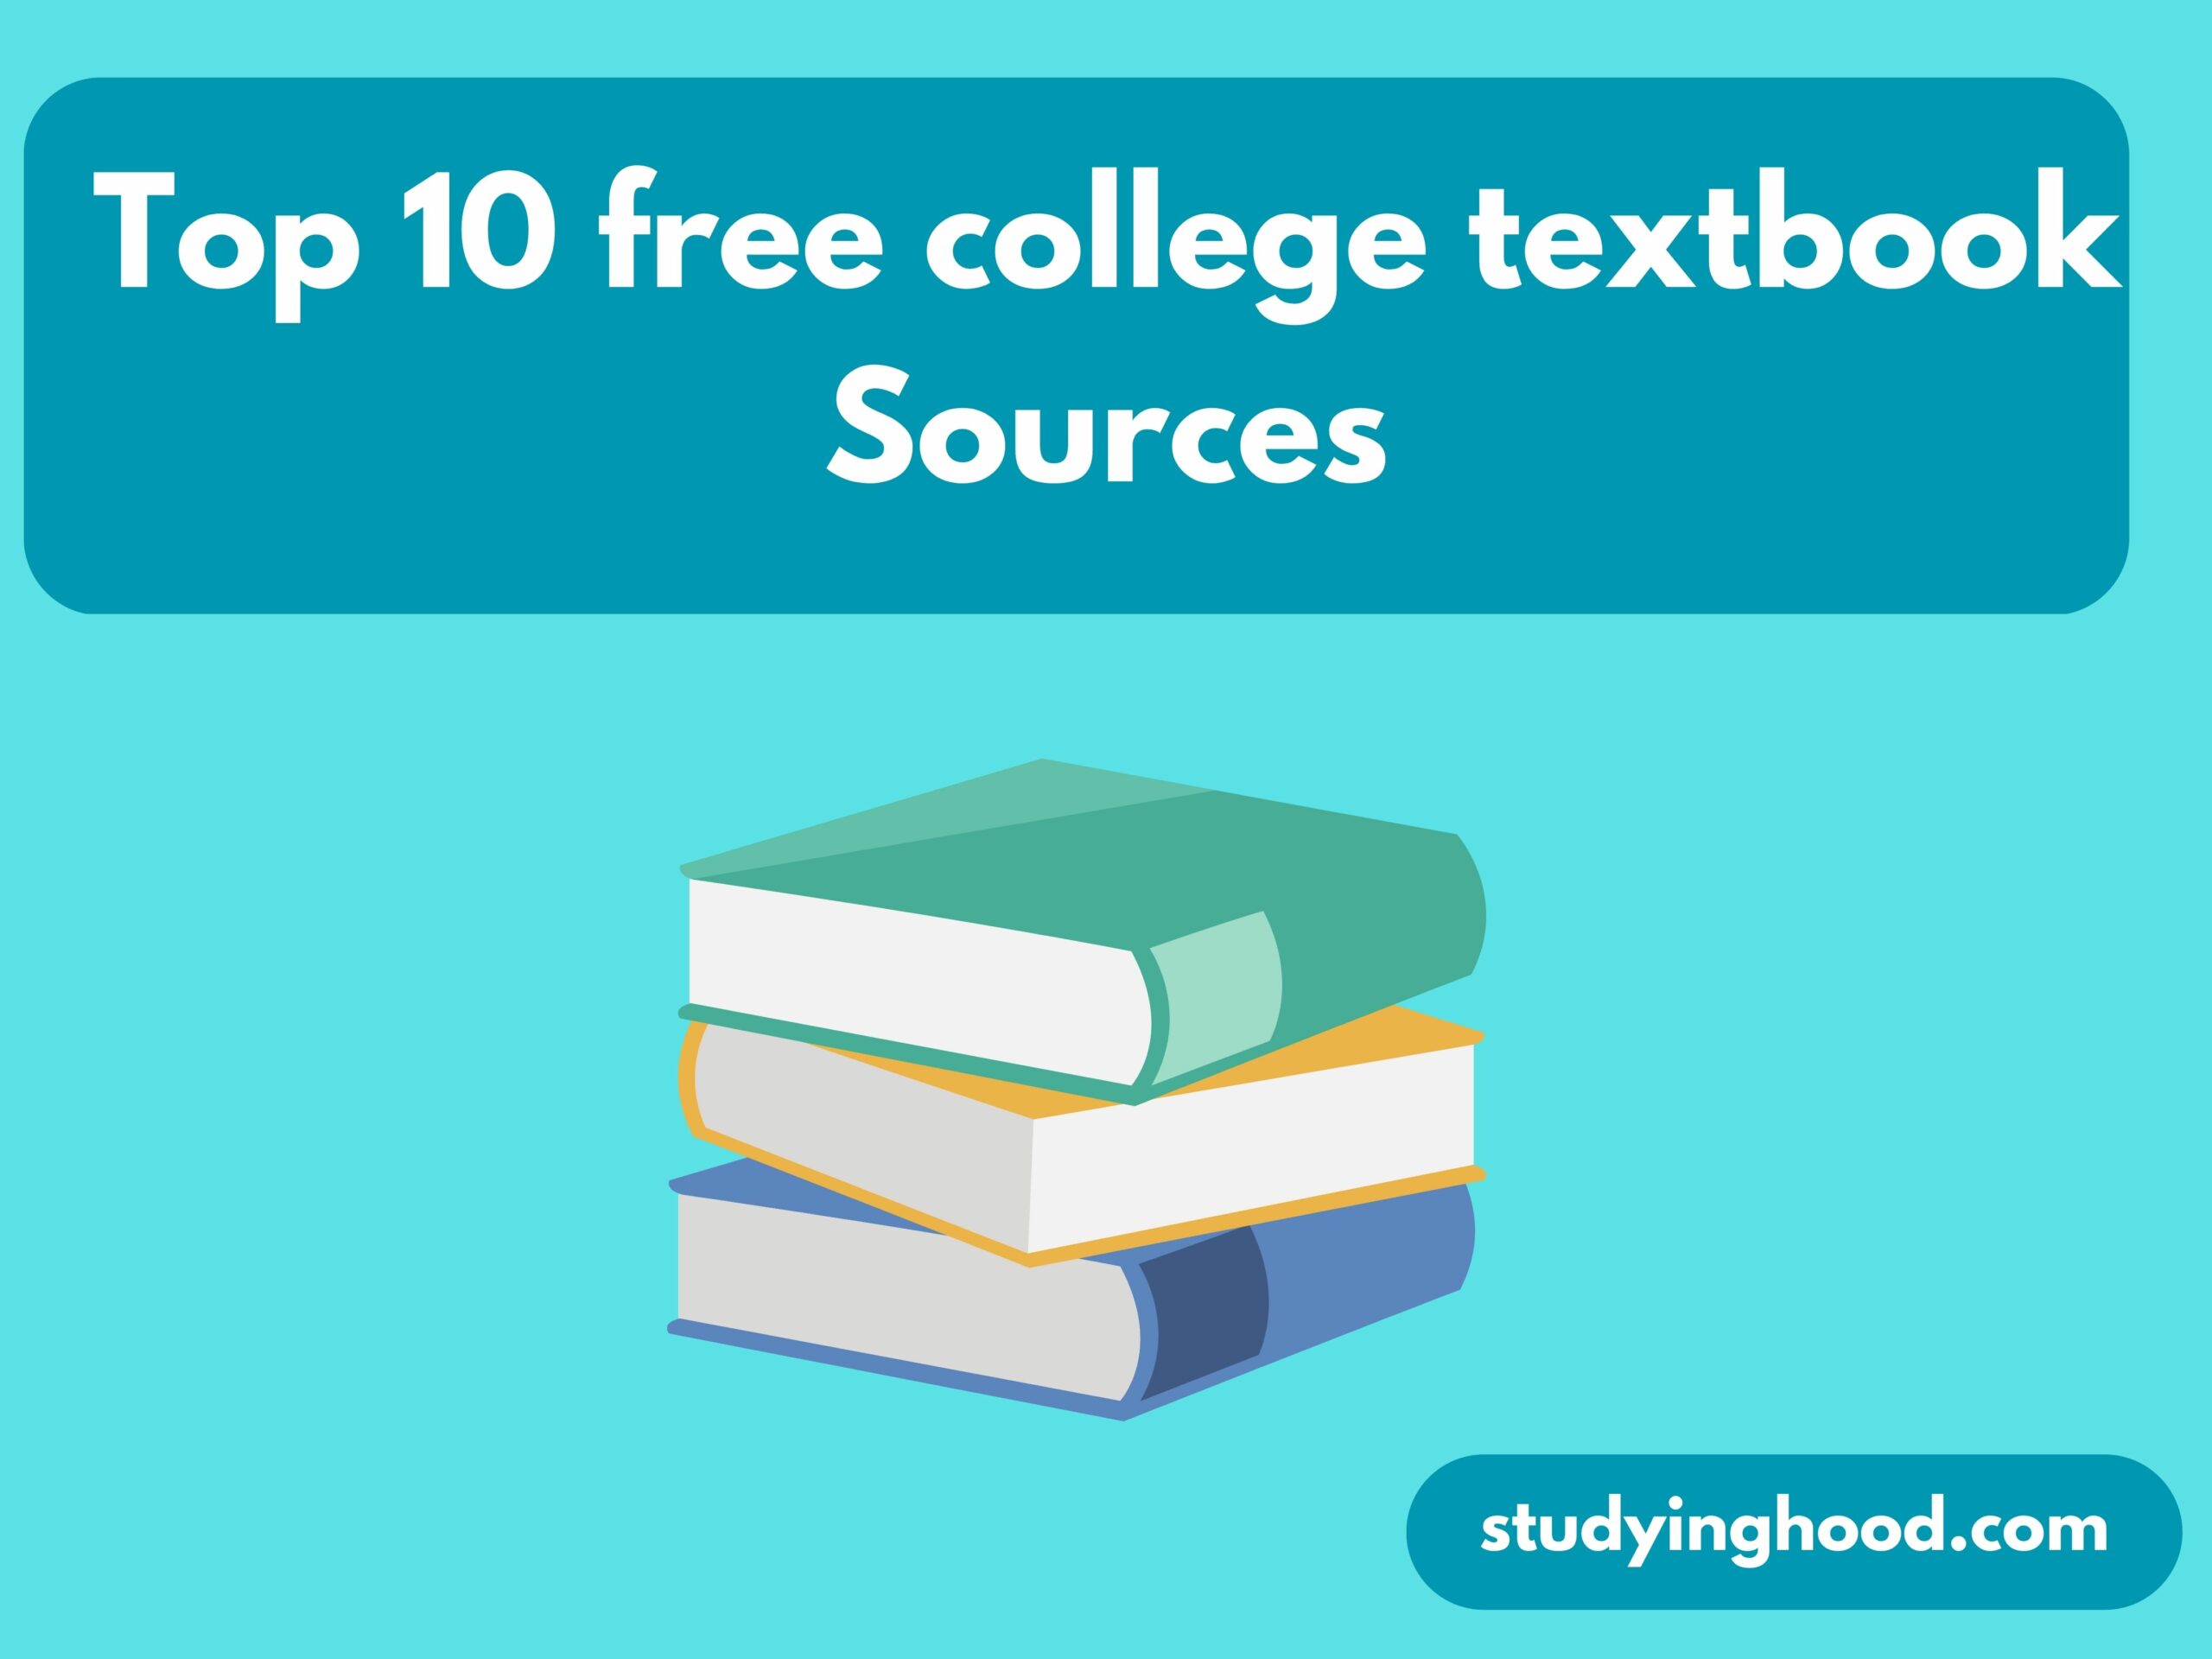 Top 10 free college textbook Sources